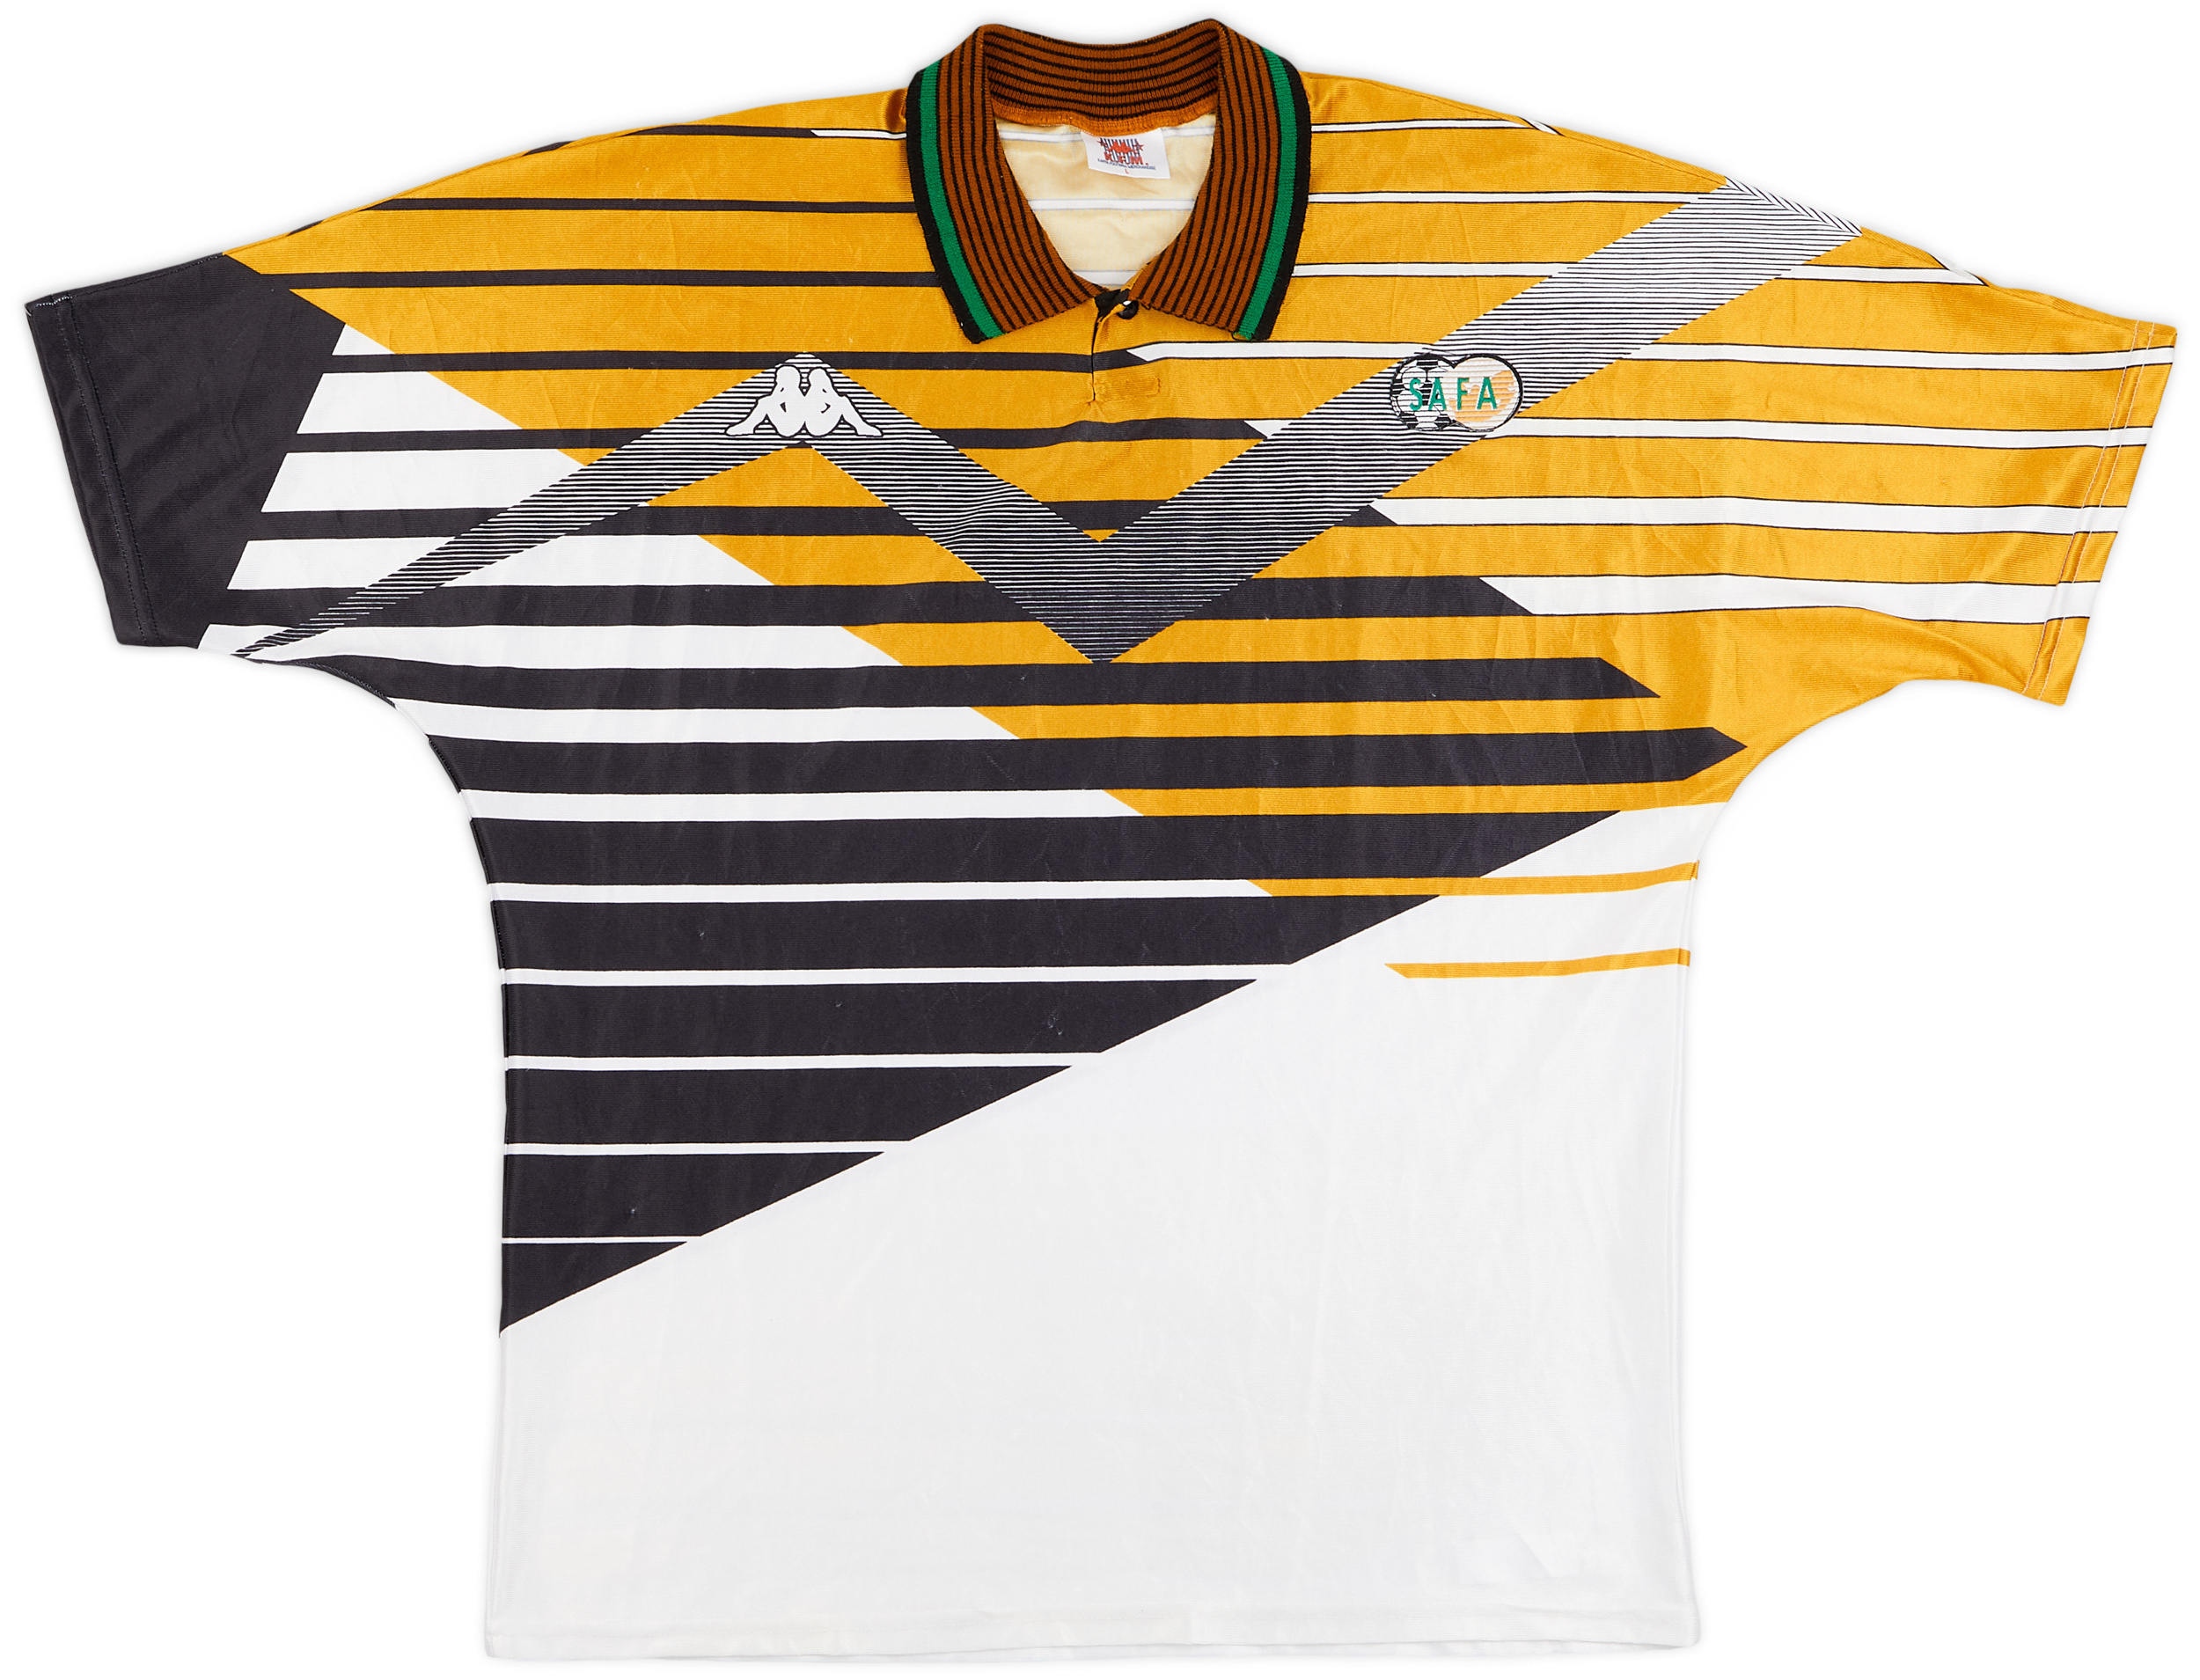 1996-98 South Africa Home Shirt - 9/10 - ()